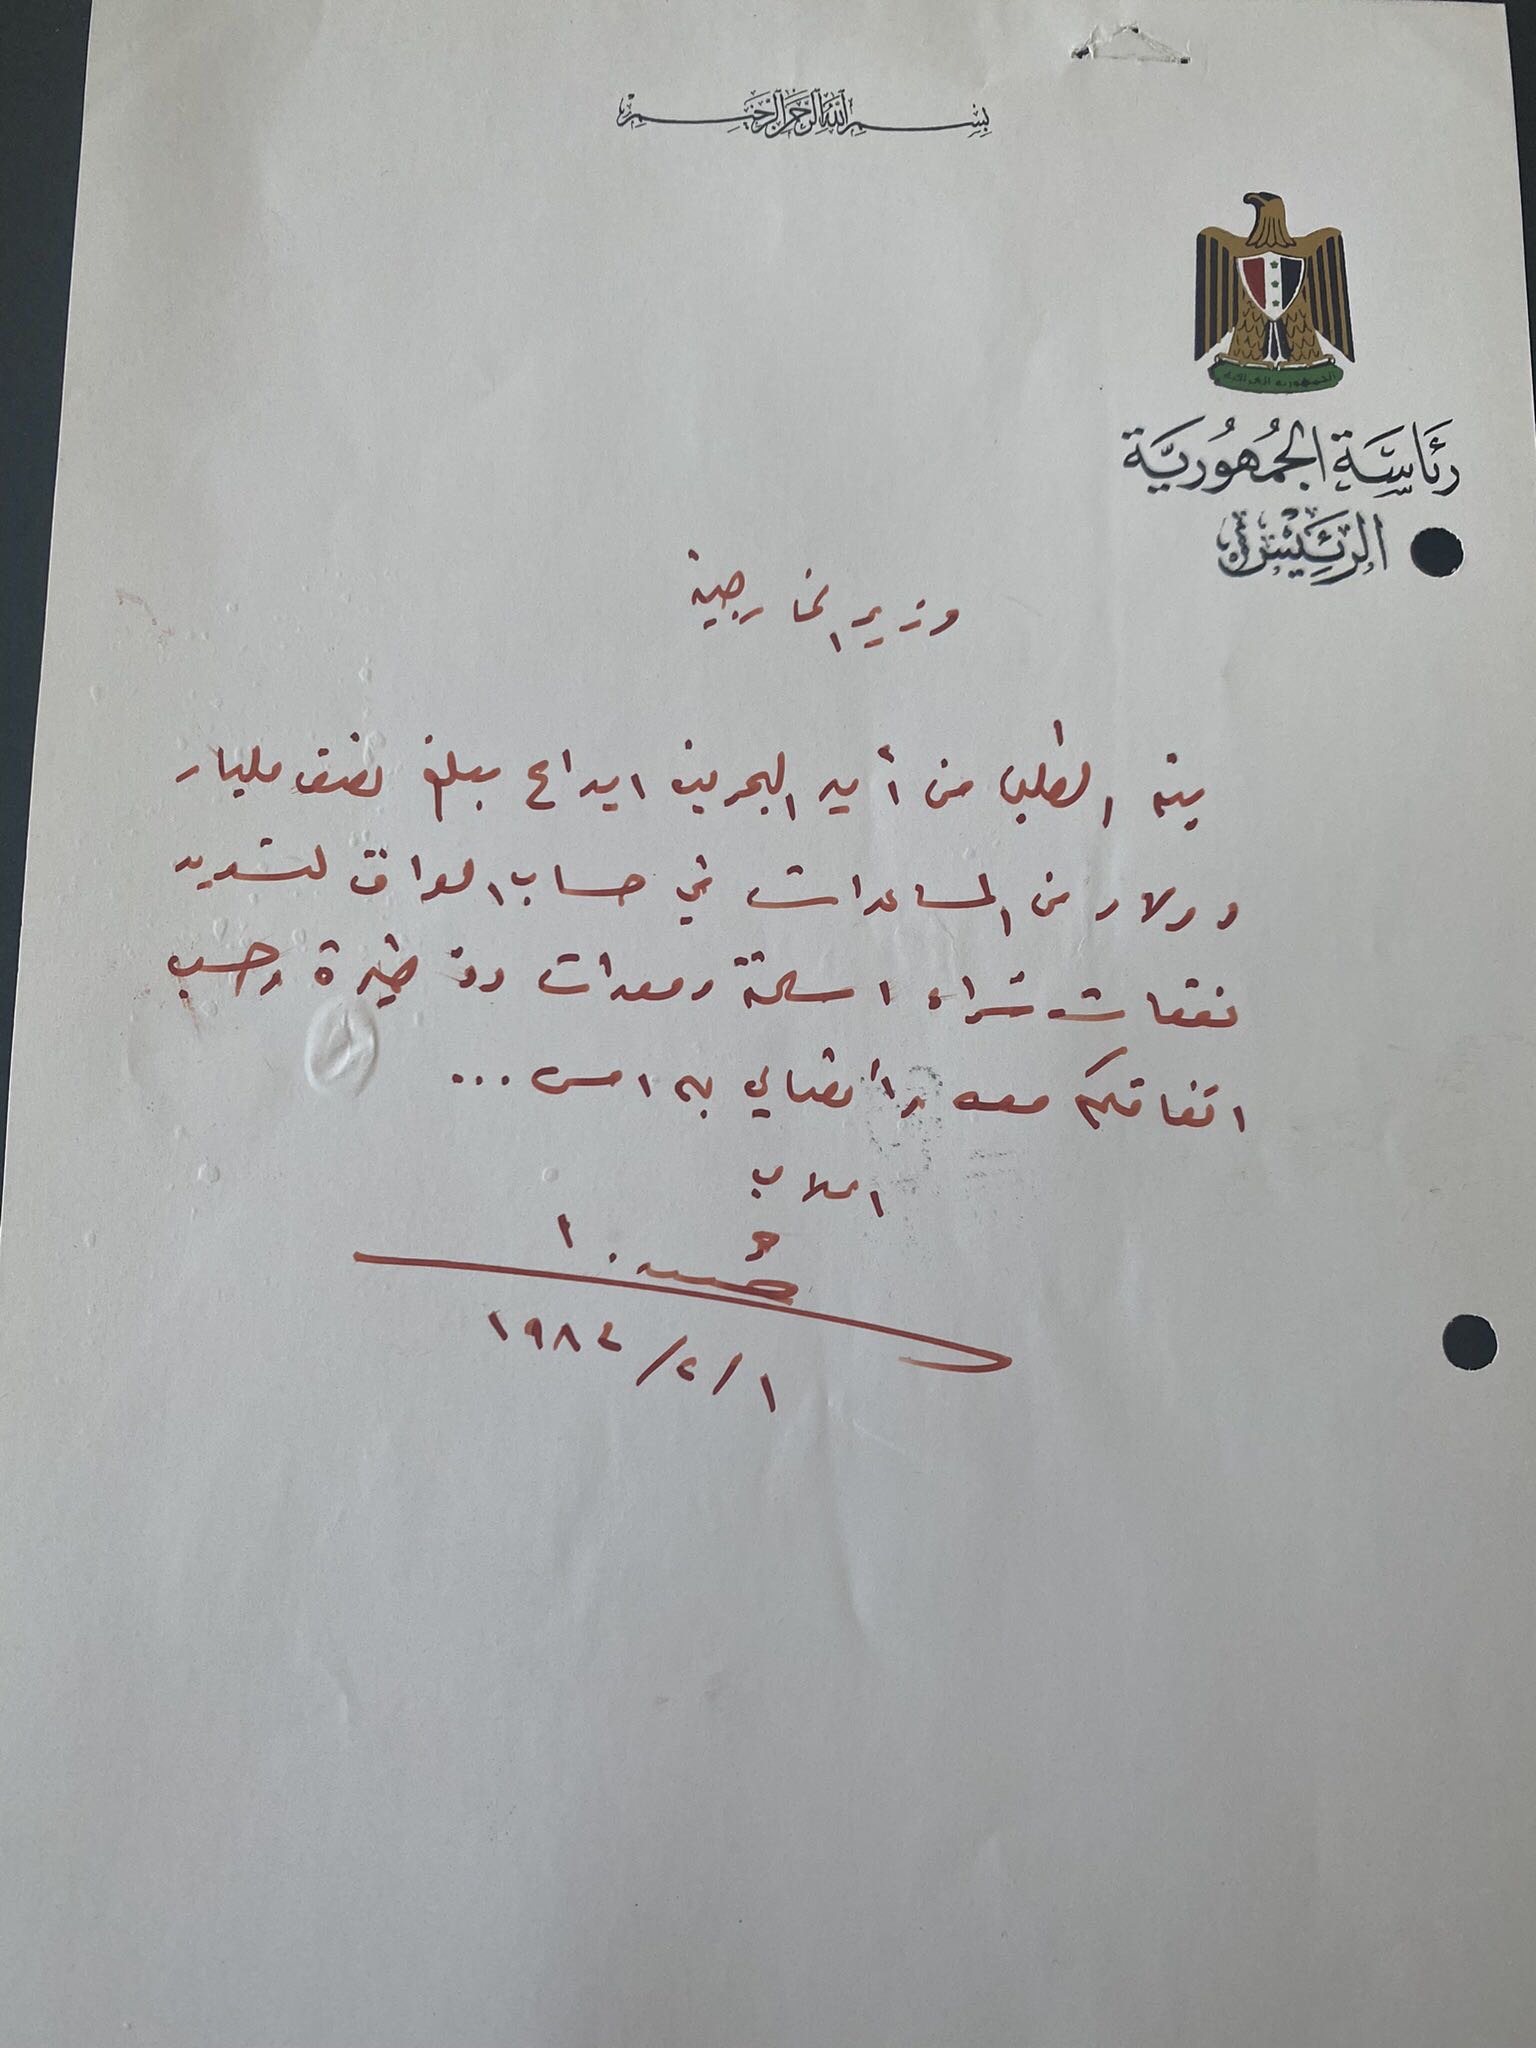 Autograph Saddam Hussein Requested Emir of Bahrain to Pay 500 $ Million Dollars